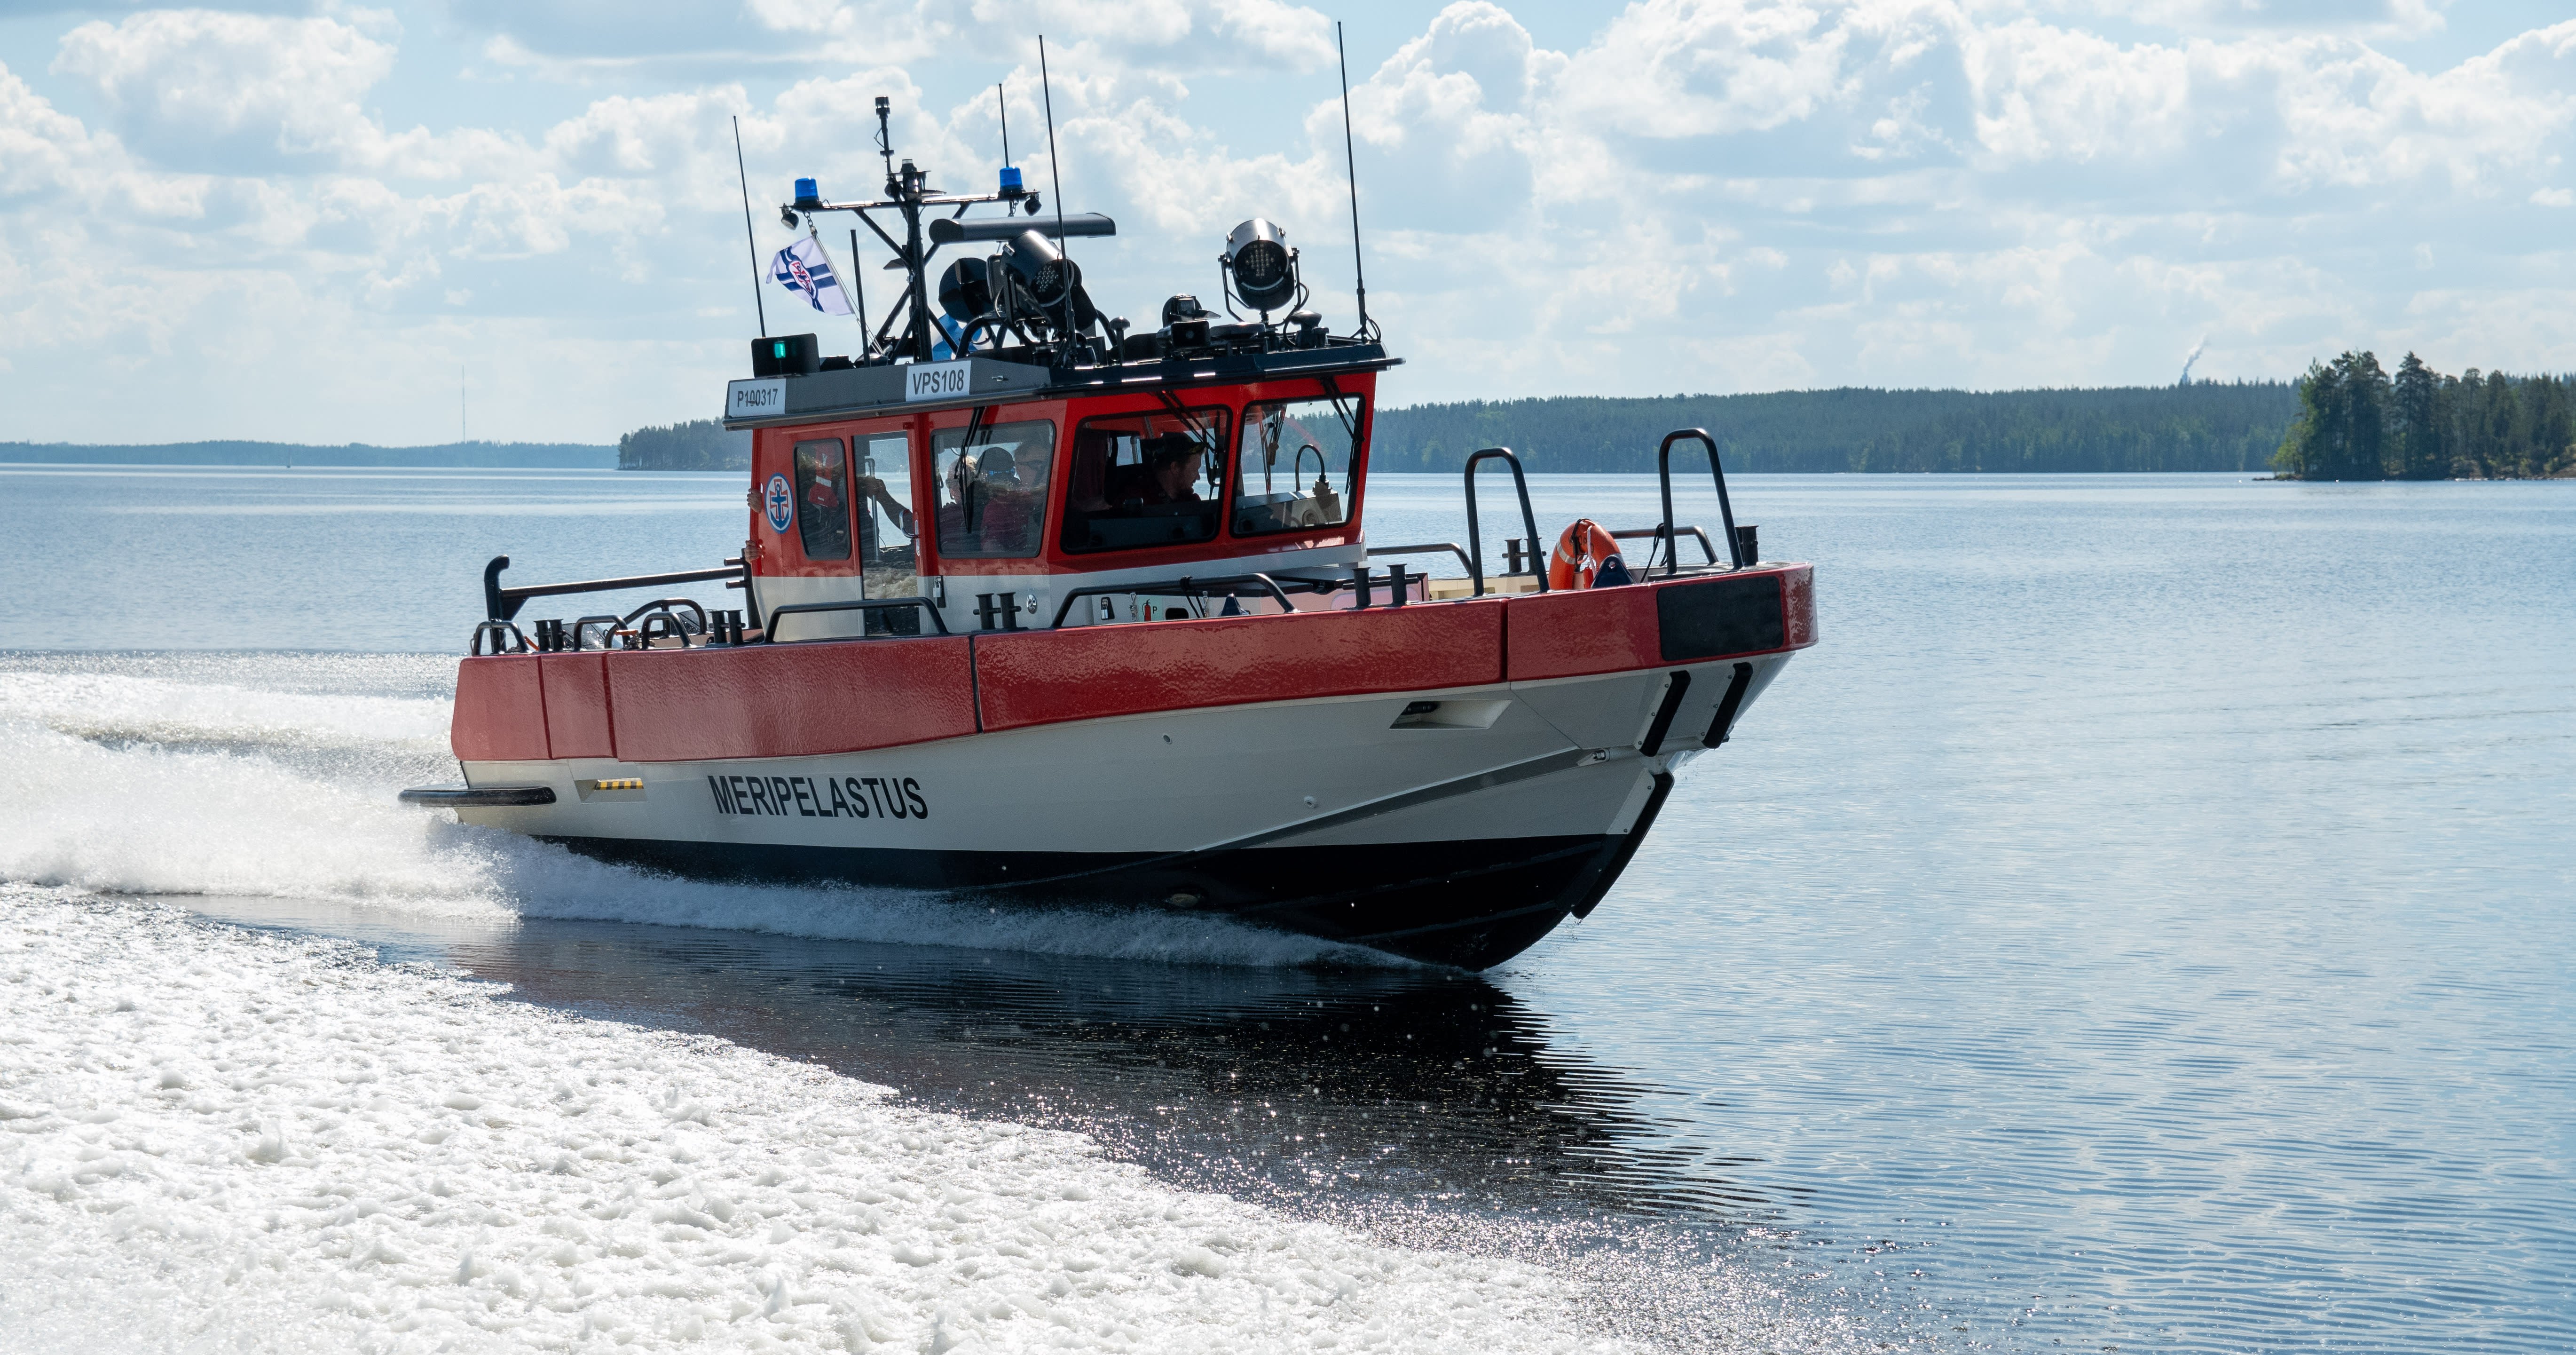 The Coast Guard rescued 50 passengers from a broken water bus on the coast of Helsinki